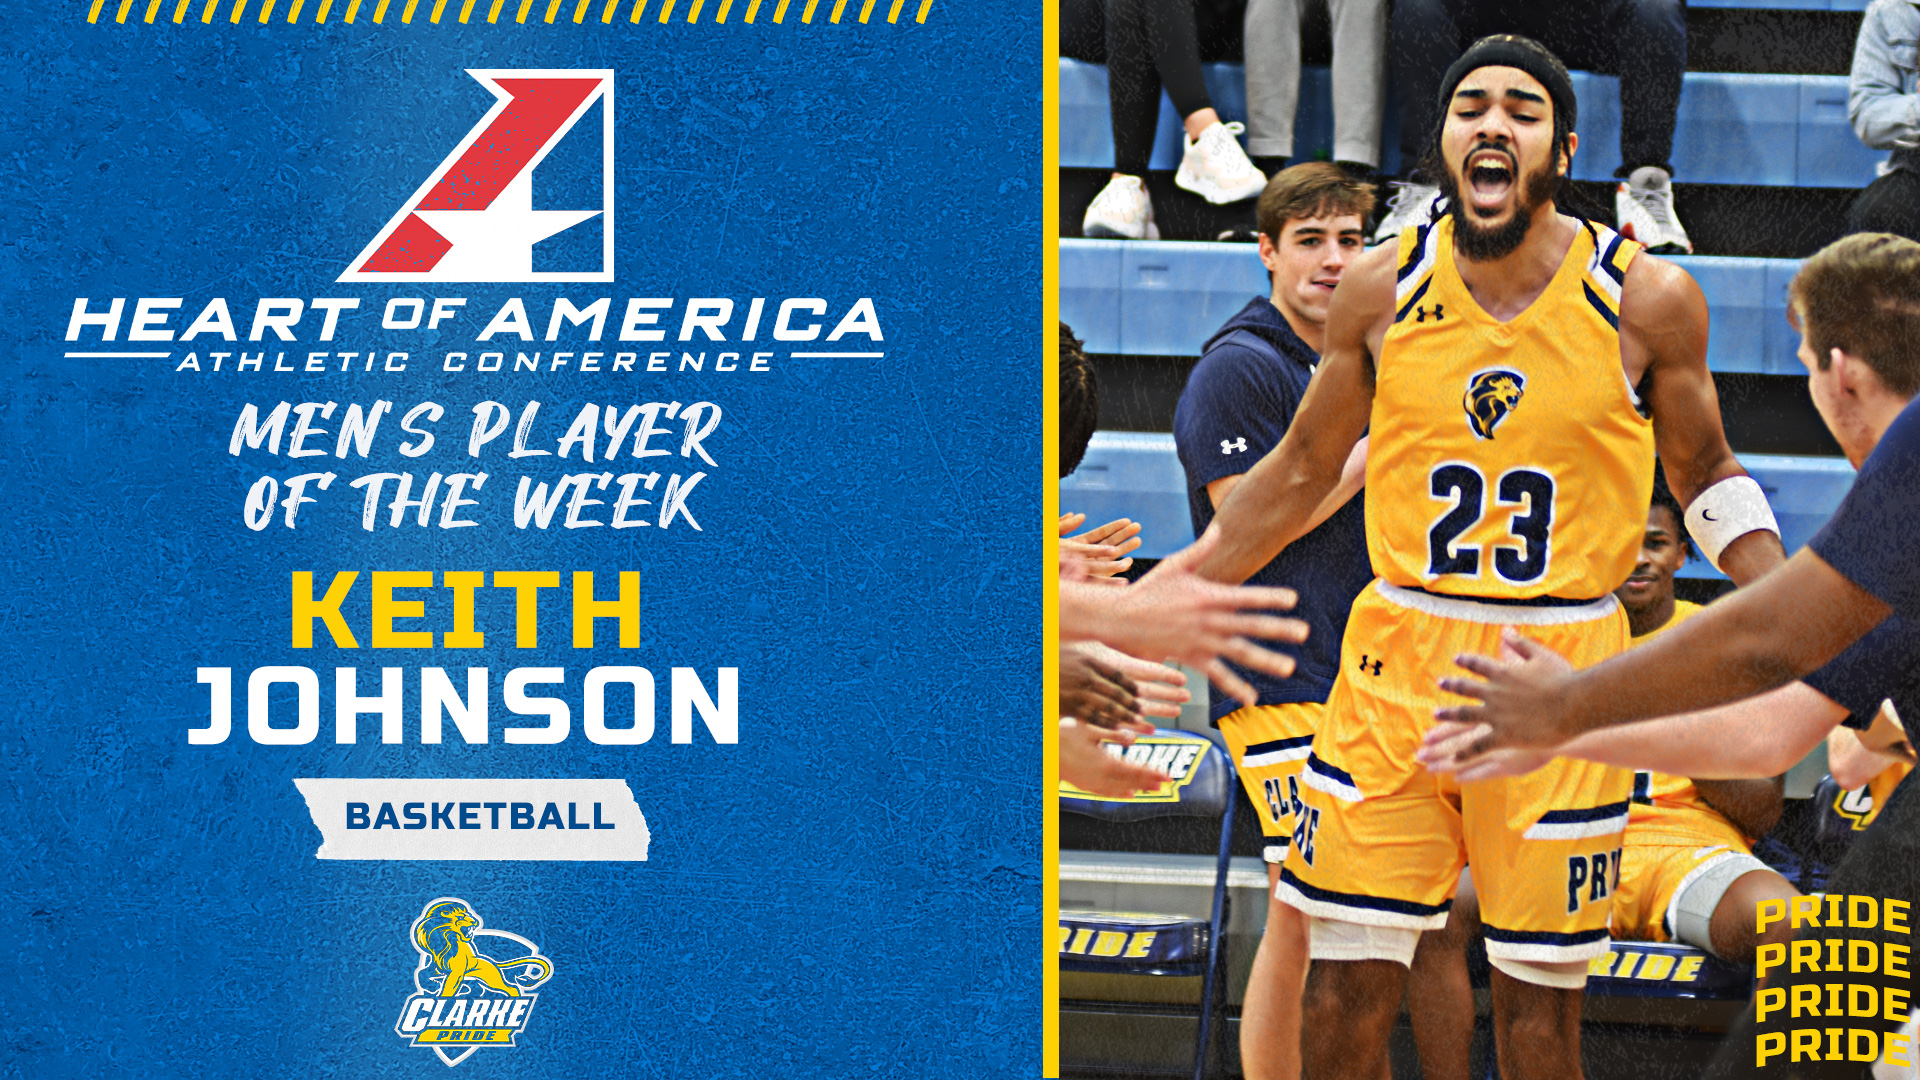 Heart of America Athletic Conference
Men's Player of the Week
Keith Johnson
Basketball